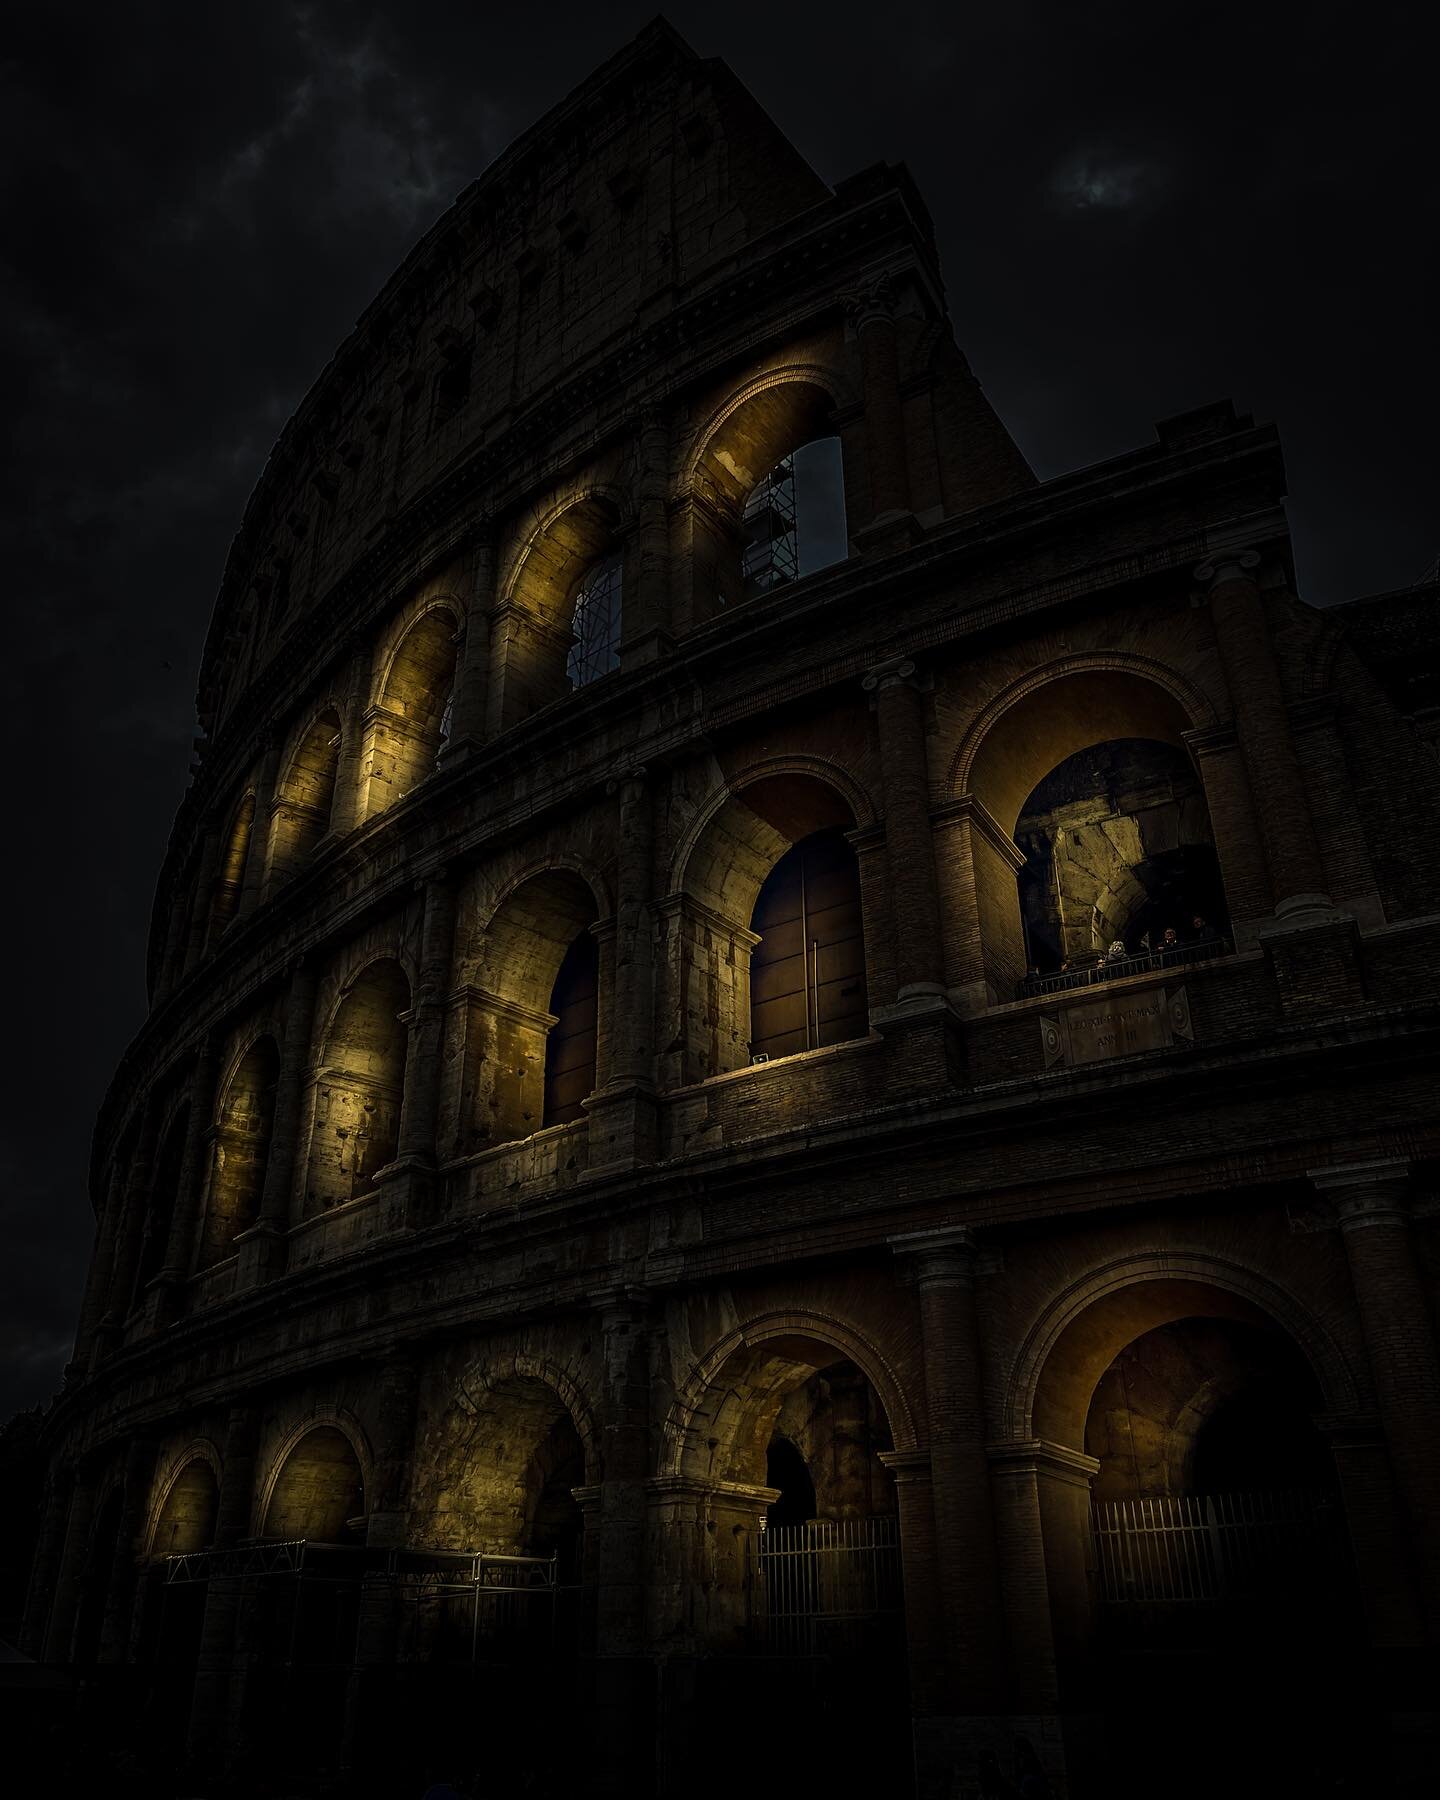 Amidst the hush of twilight, the Coliseum stands as a testament to time, echoing tales of gladiators and empires long gone. Bathed in the soft glow of night, Rome's grandeur whispers secrets of the ages. #WhenInRome #EternalHistory